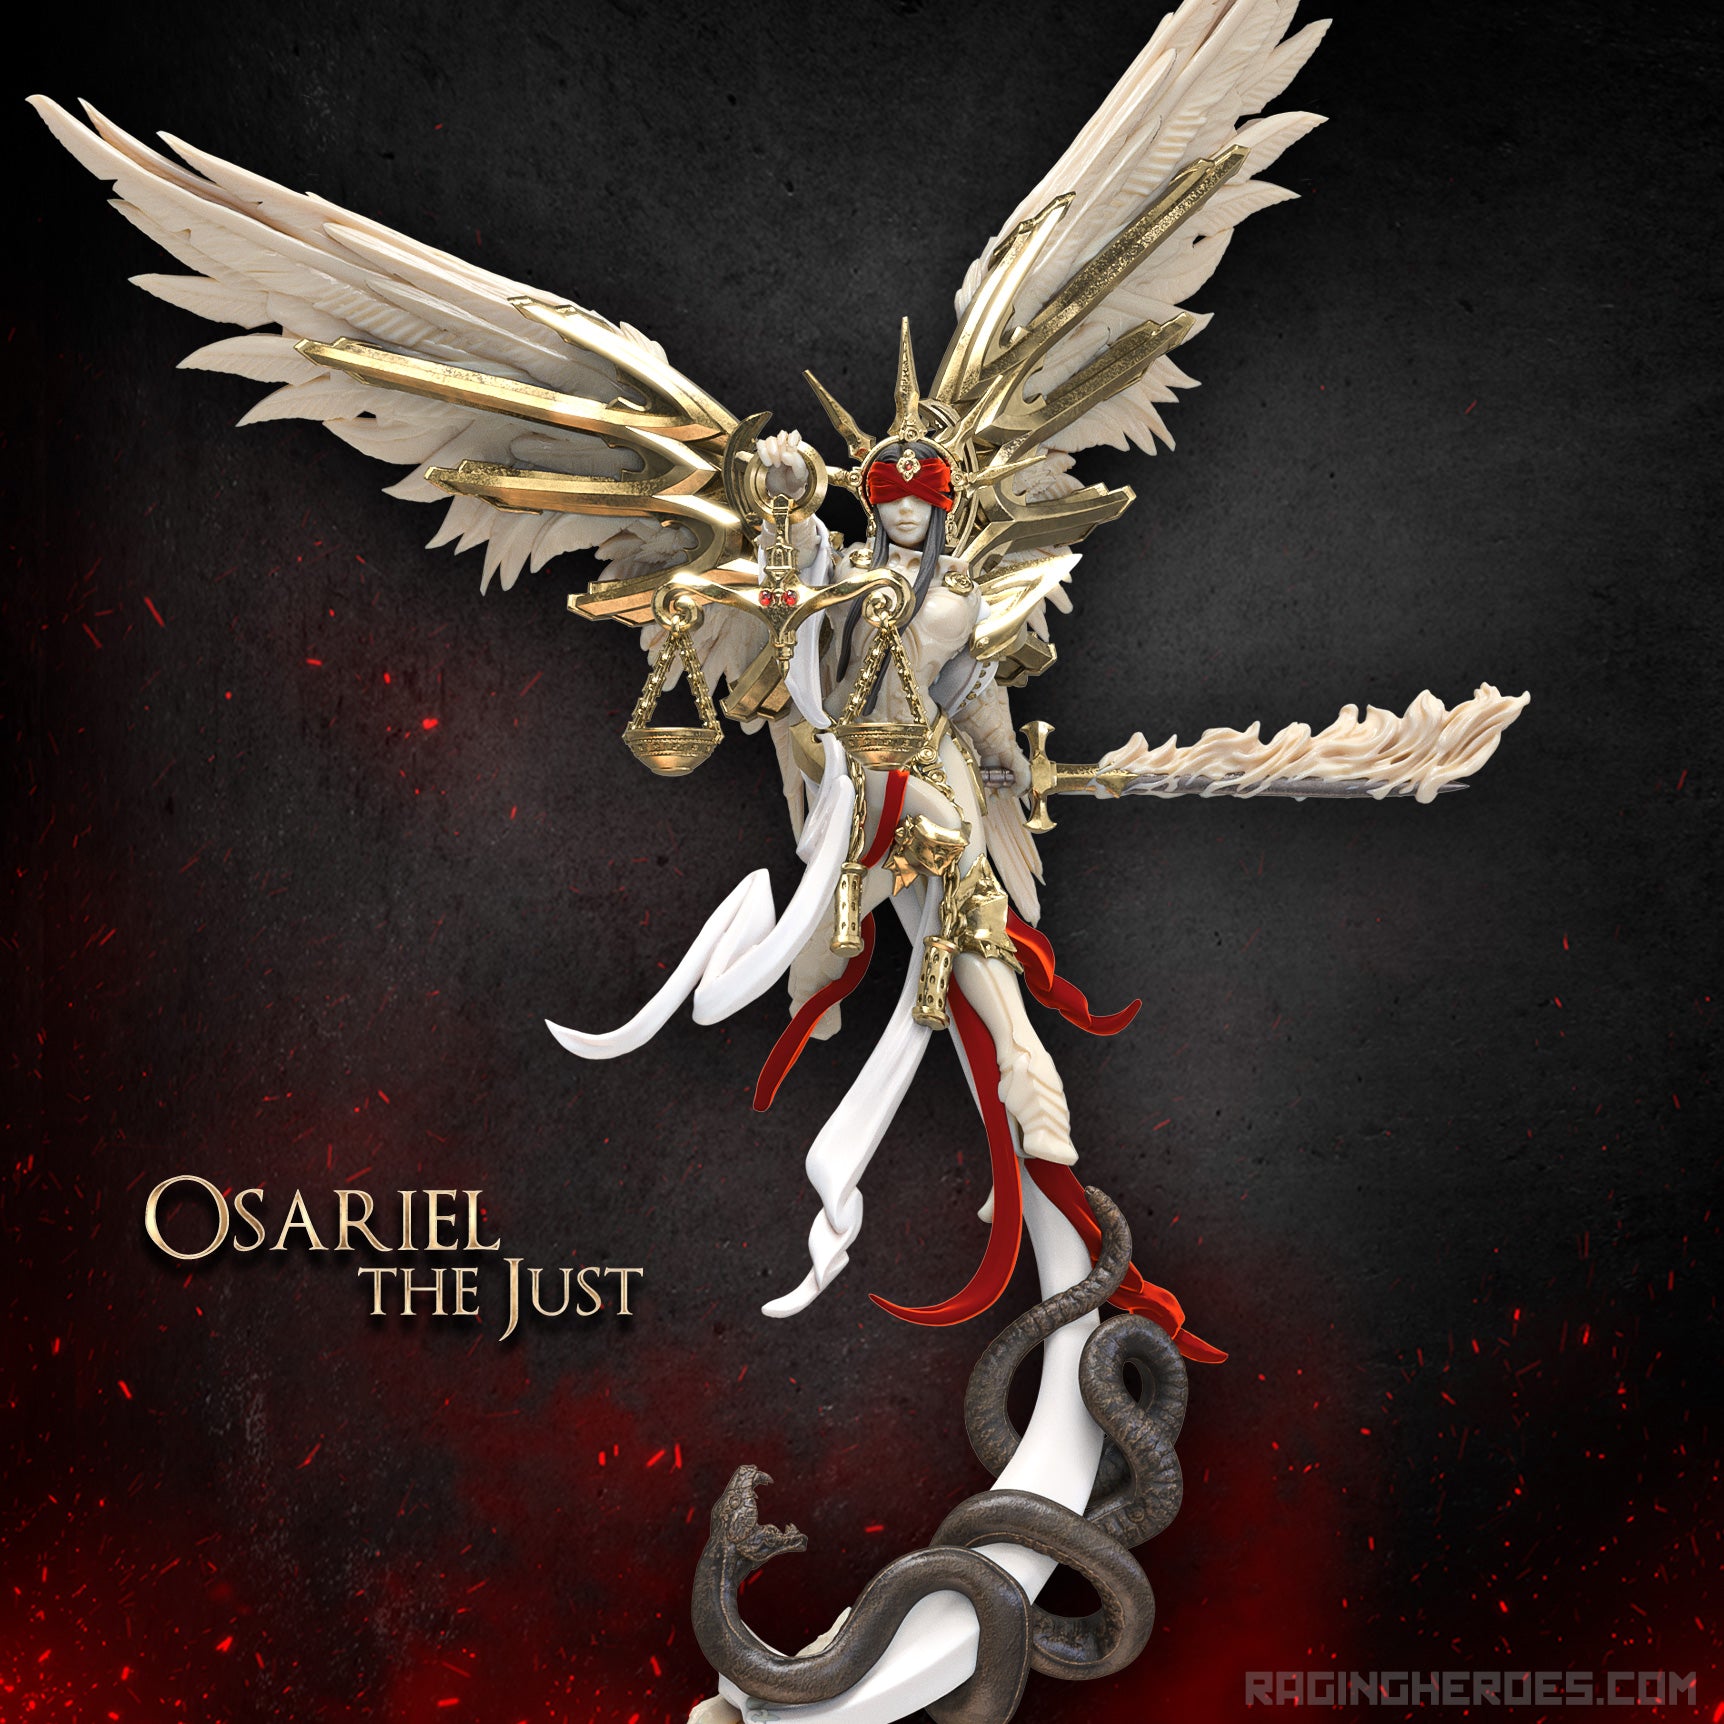 Osariel The Just is coming to punish you